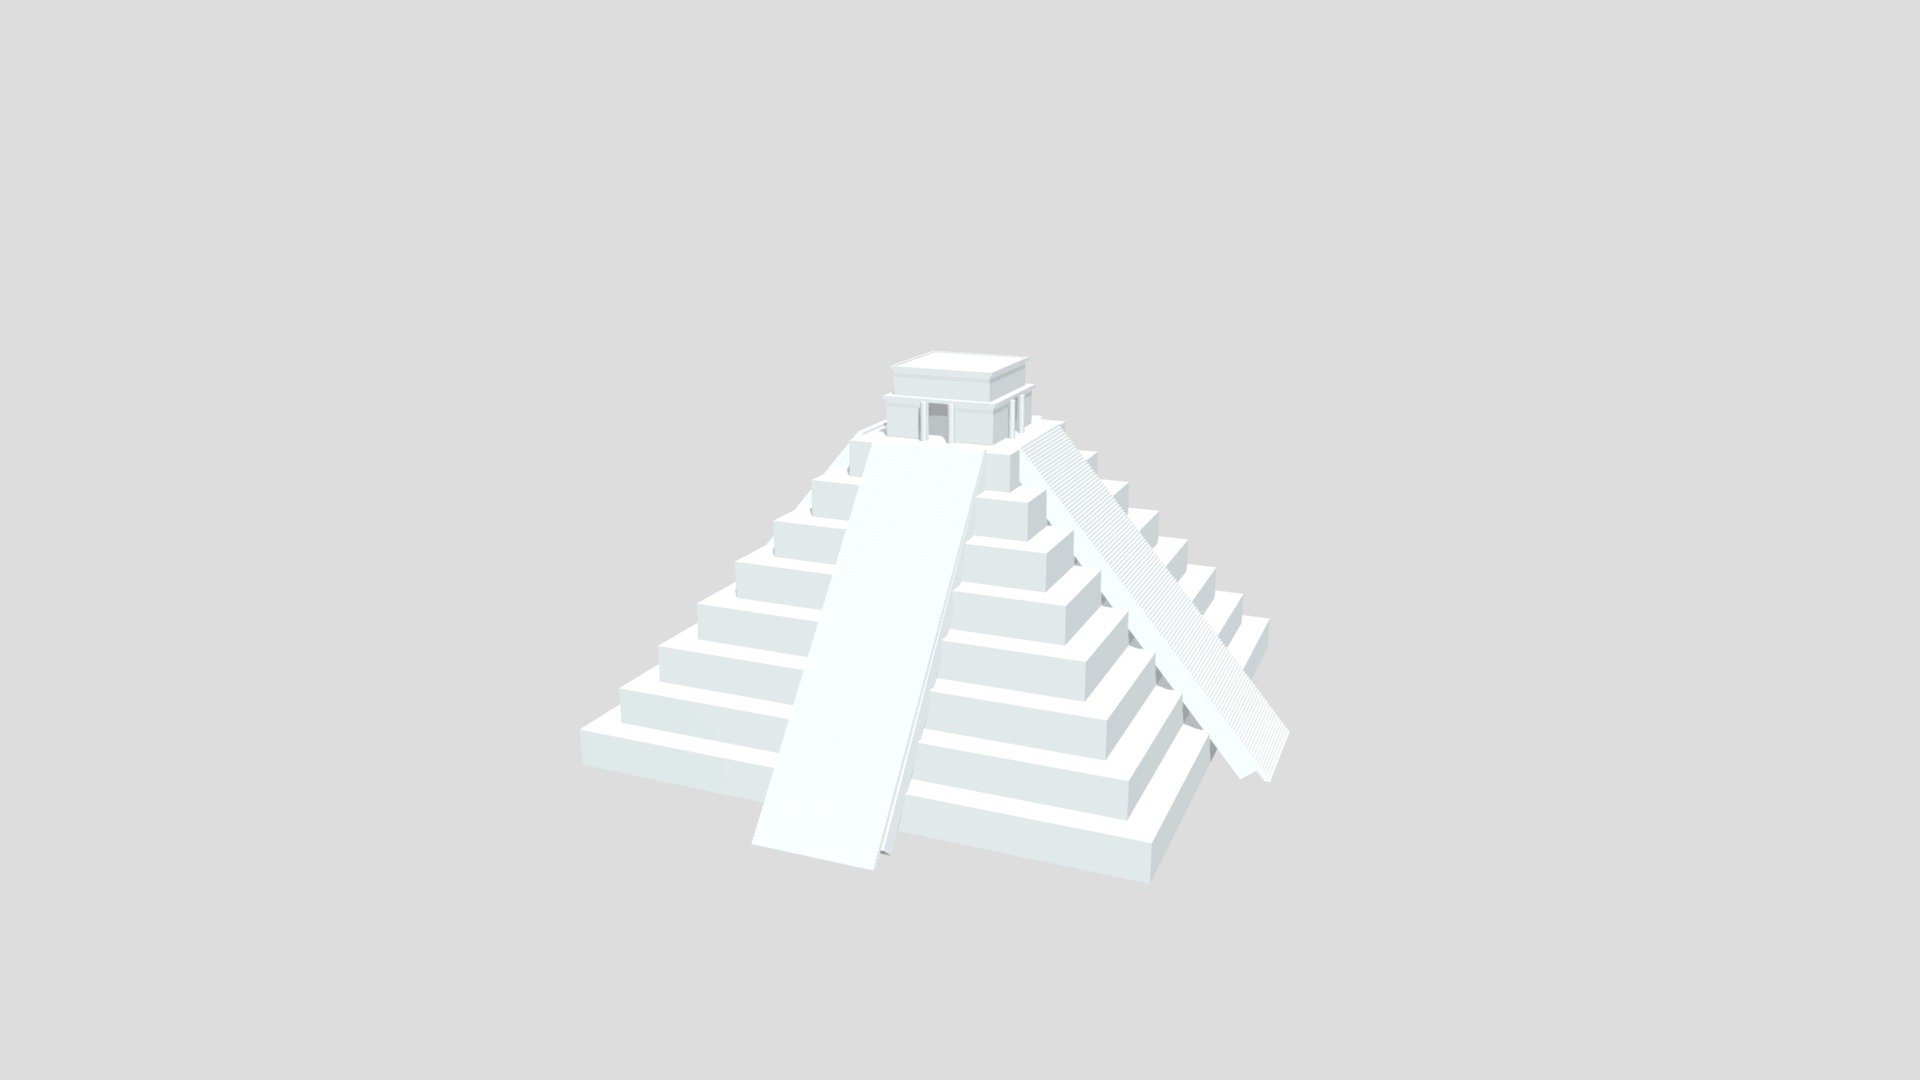 The Mayan pyramid model - Download Free 3D model by Dilmira ...